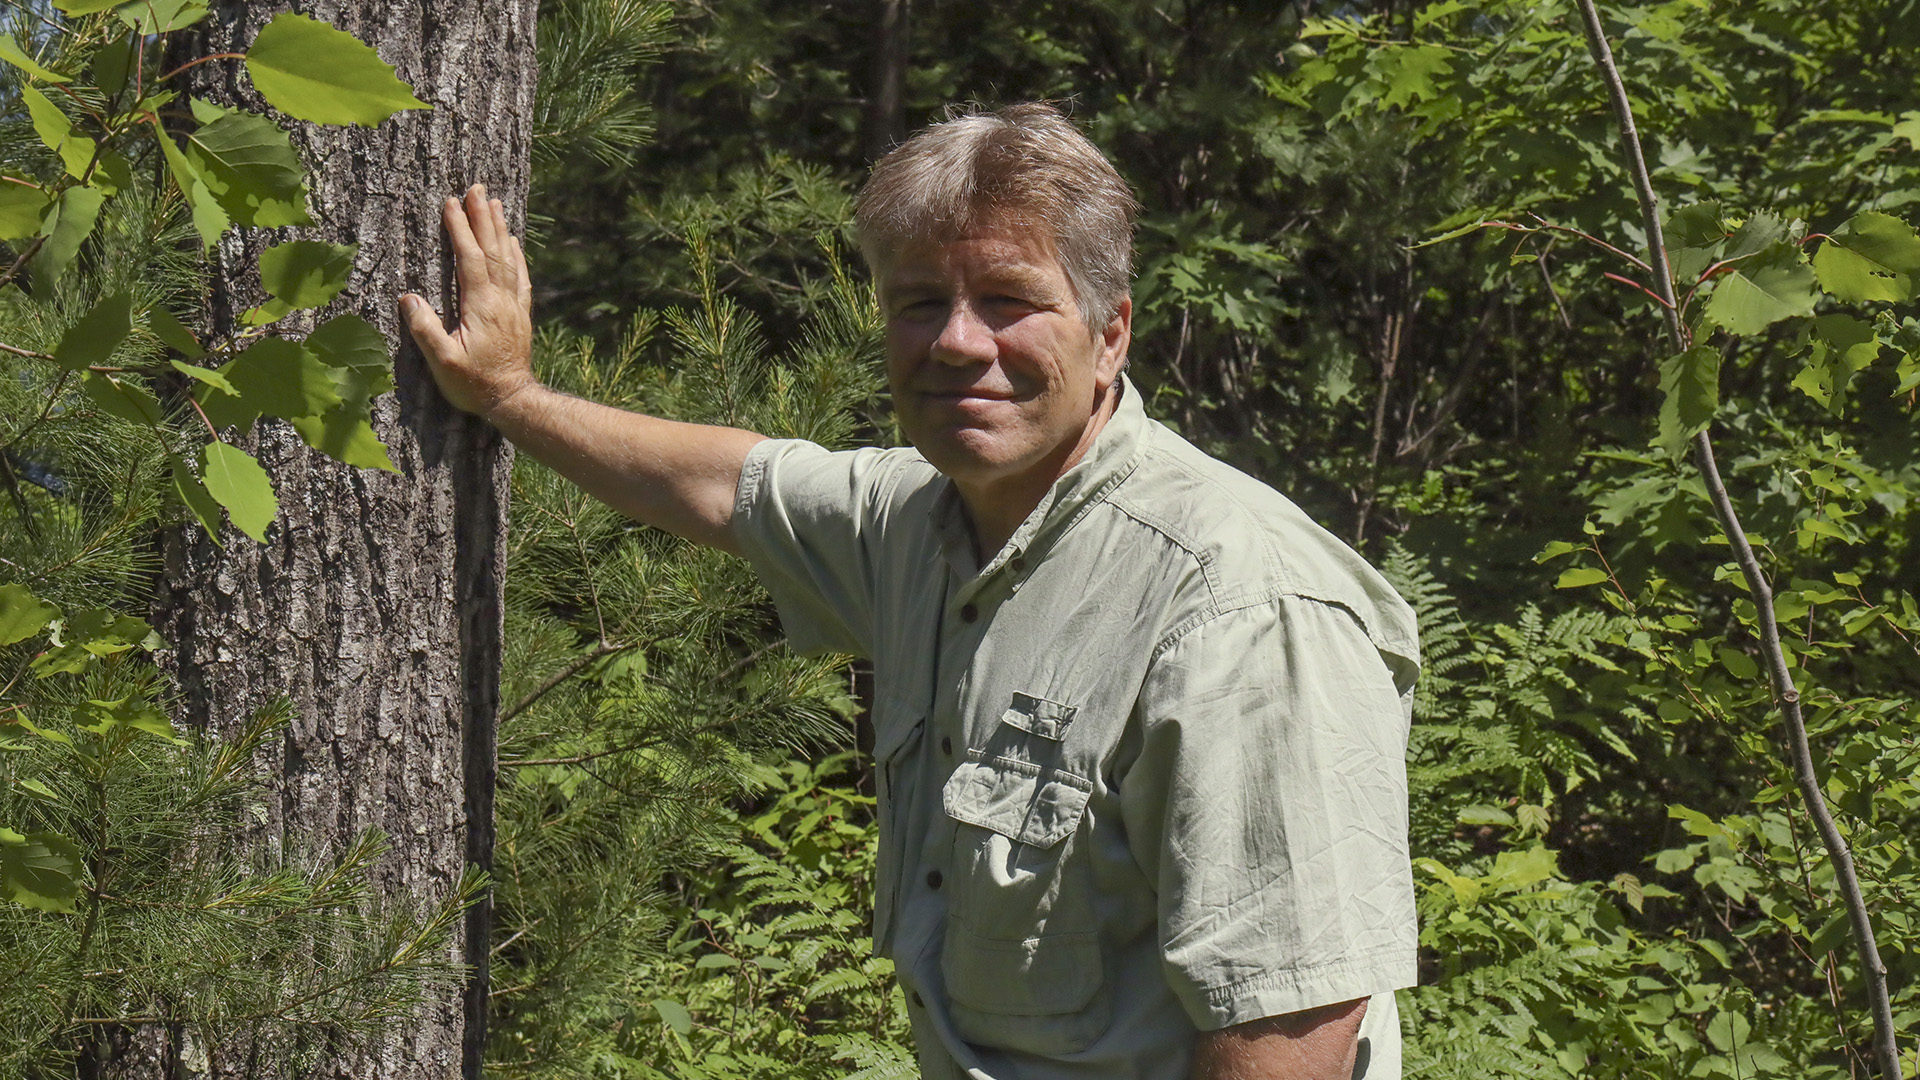 John Schwarzmann holds his right hand against the trunk of a tree with foliage in the background.